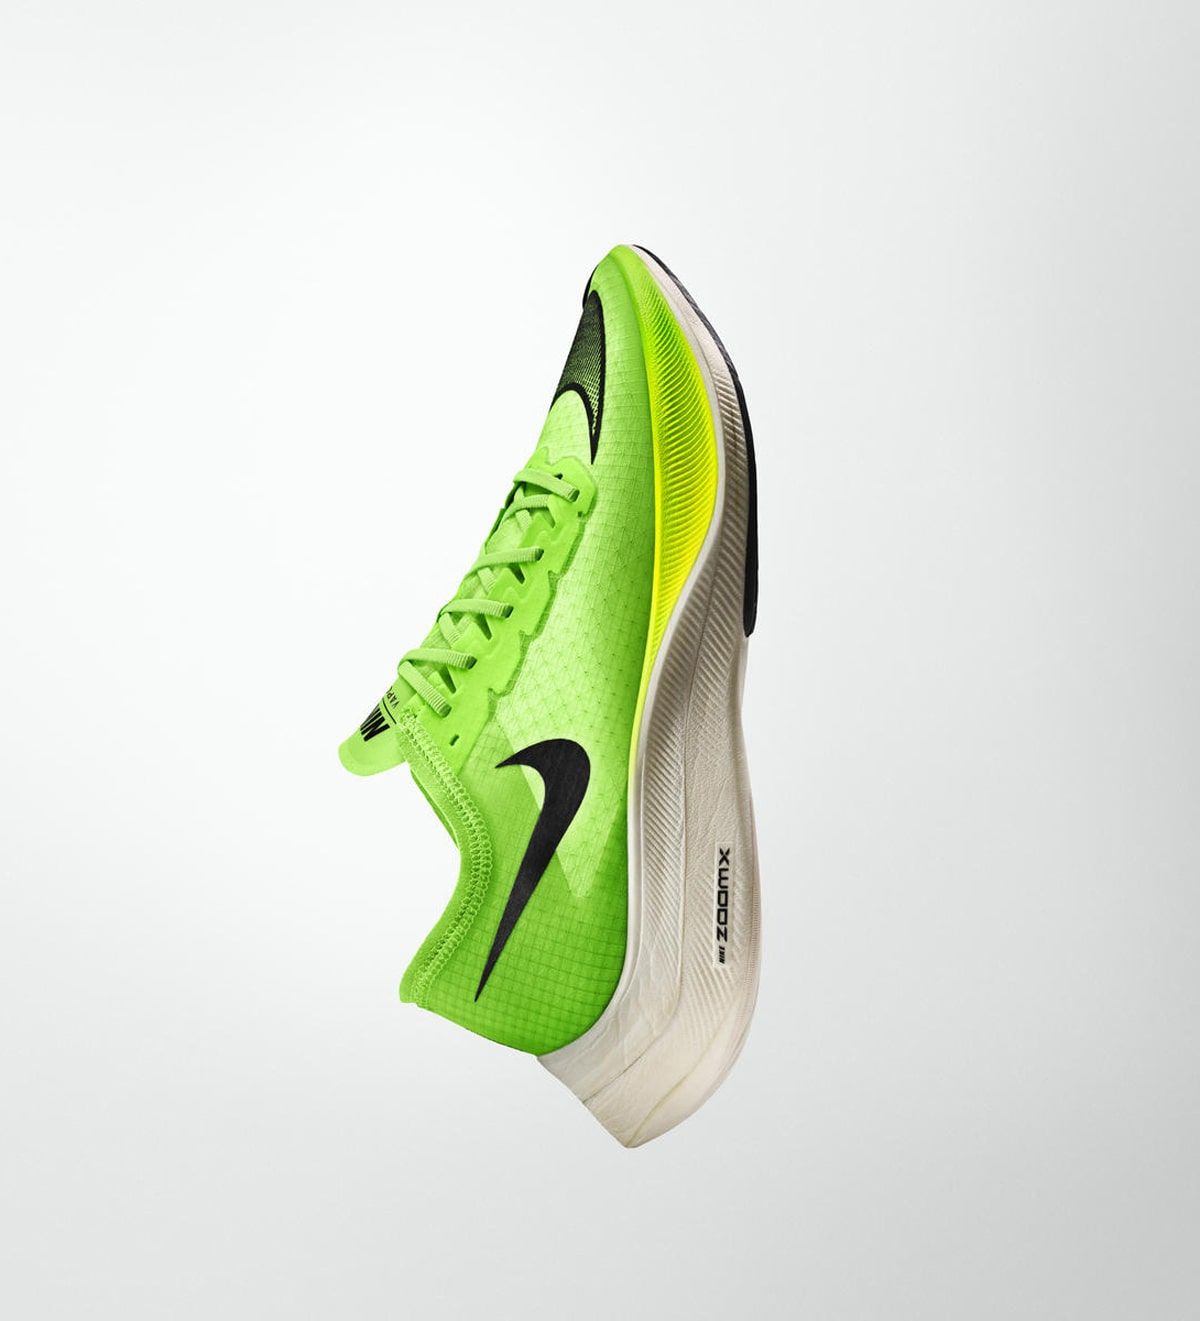 Nike's ZoomX VaporFly NEXT% Sees a Wider Release this June | House of Heat°